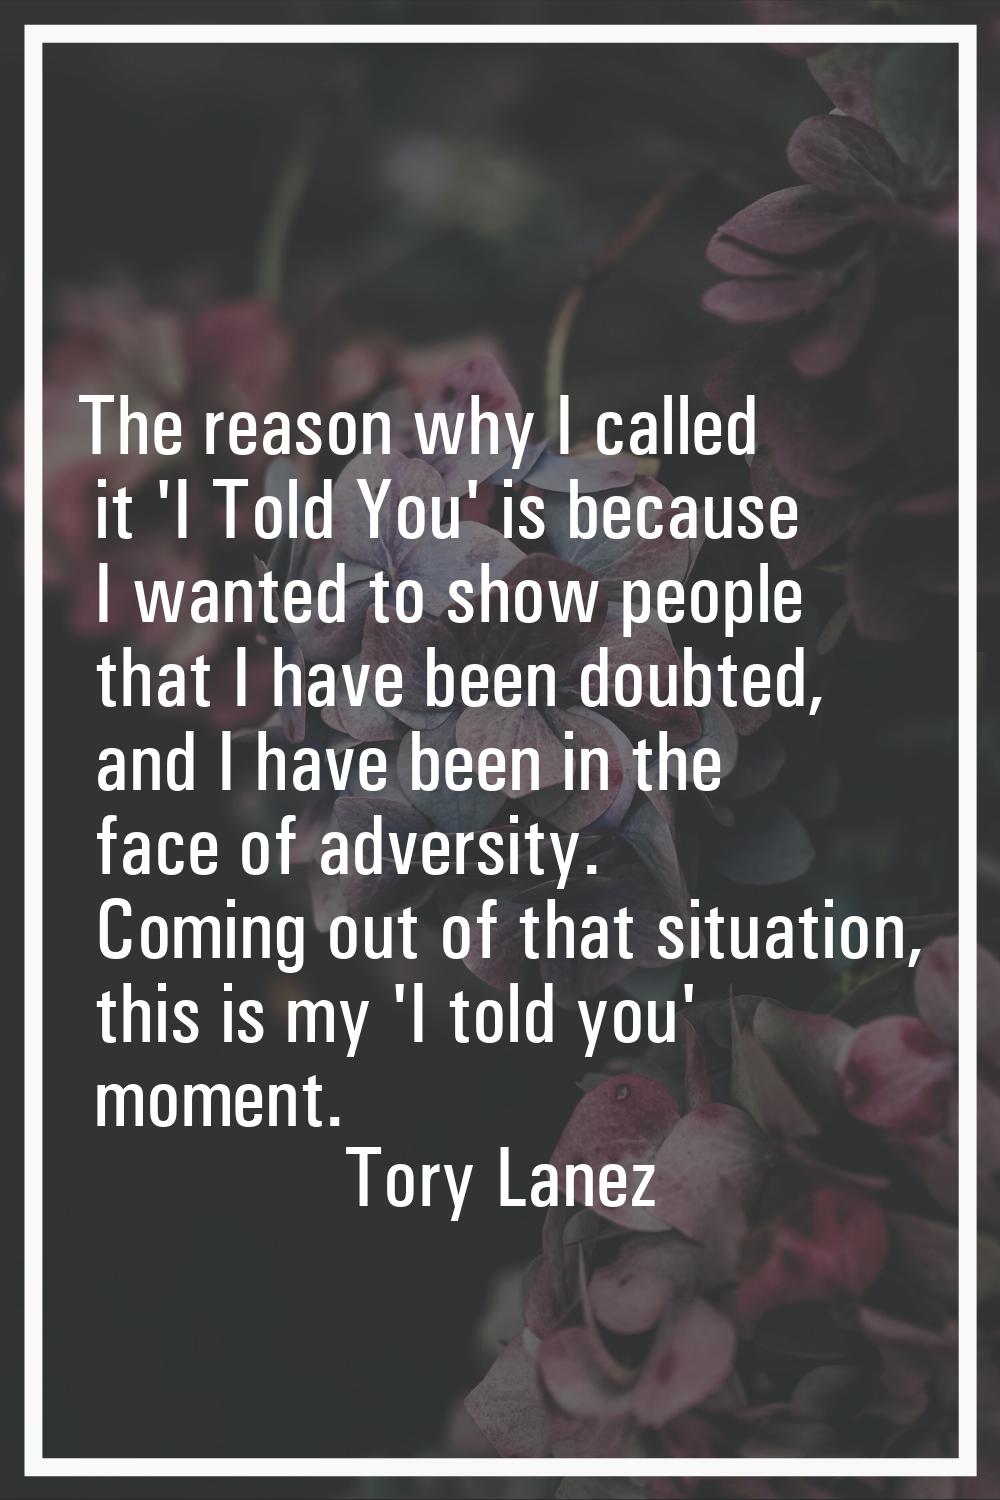 The reason why I called it 'I Told You' is because I wanted to show people that I have been doubted